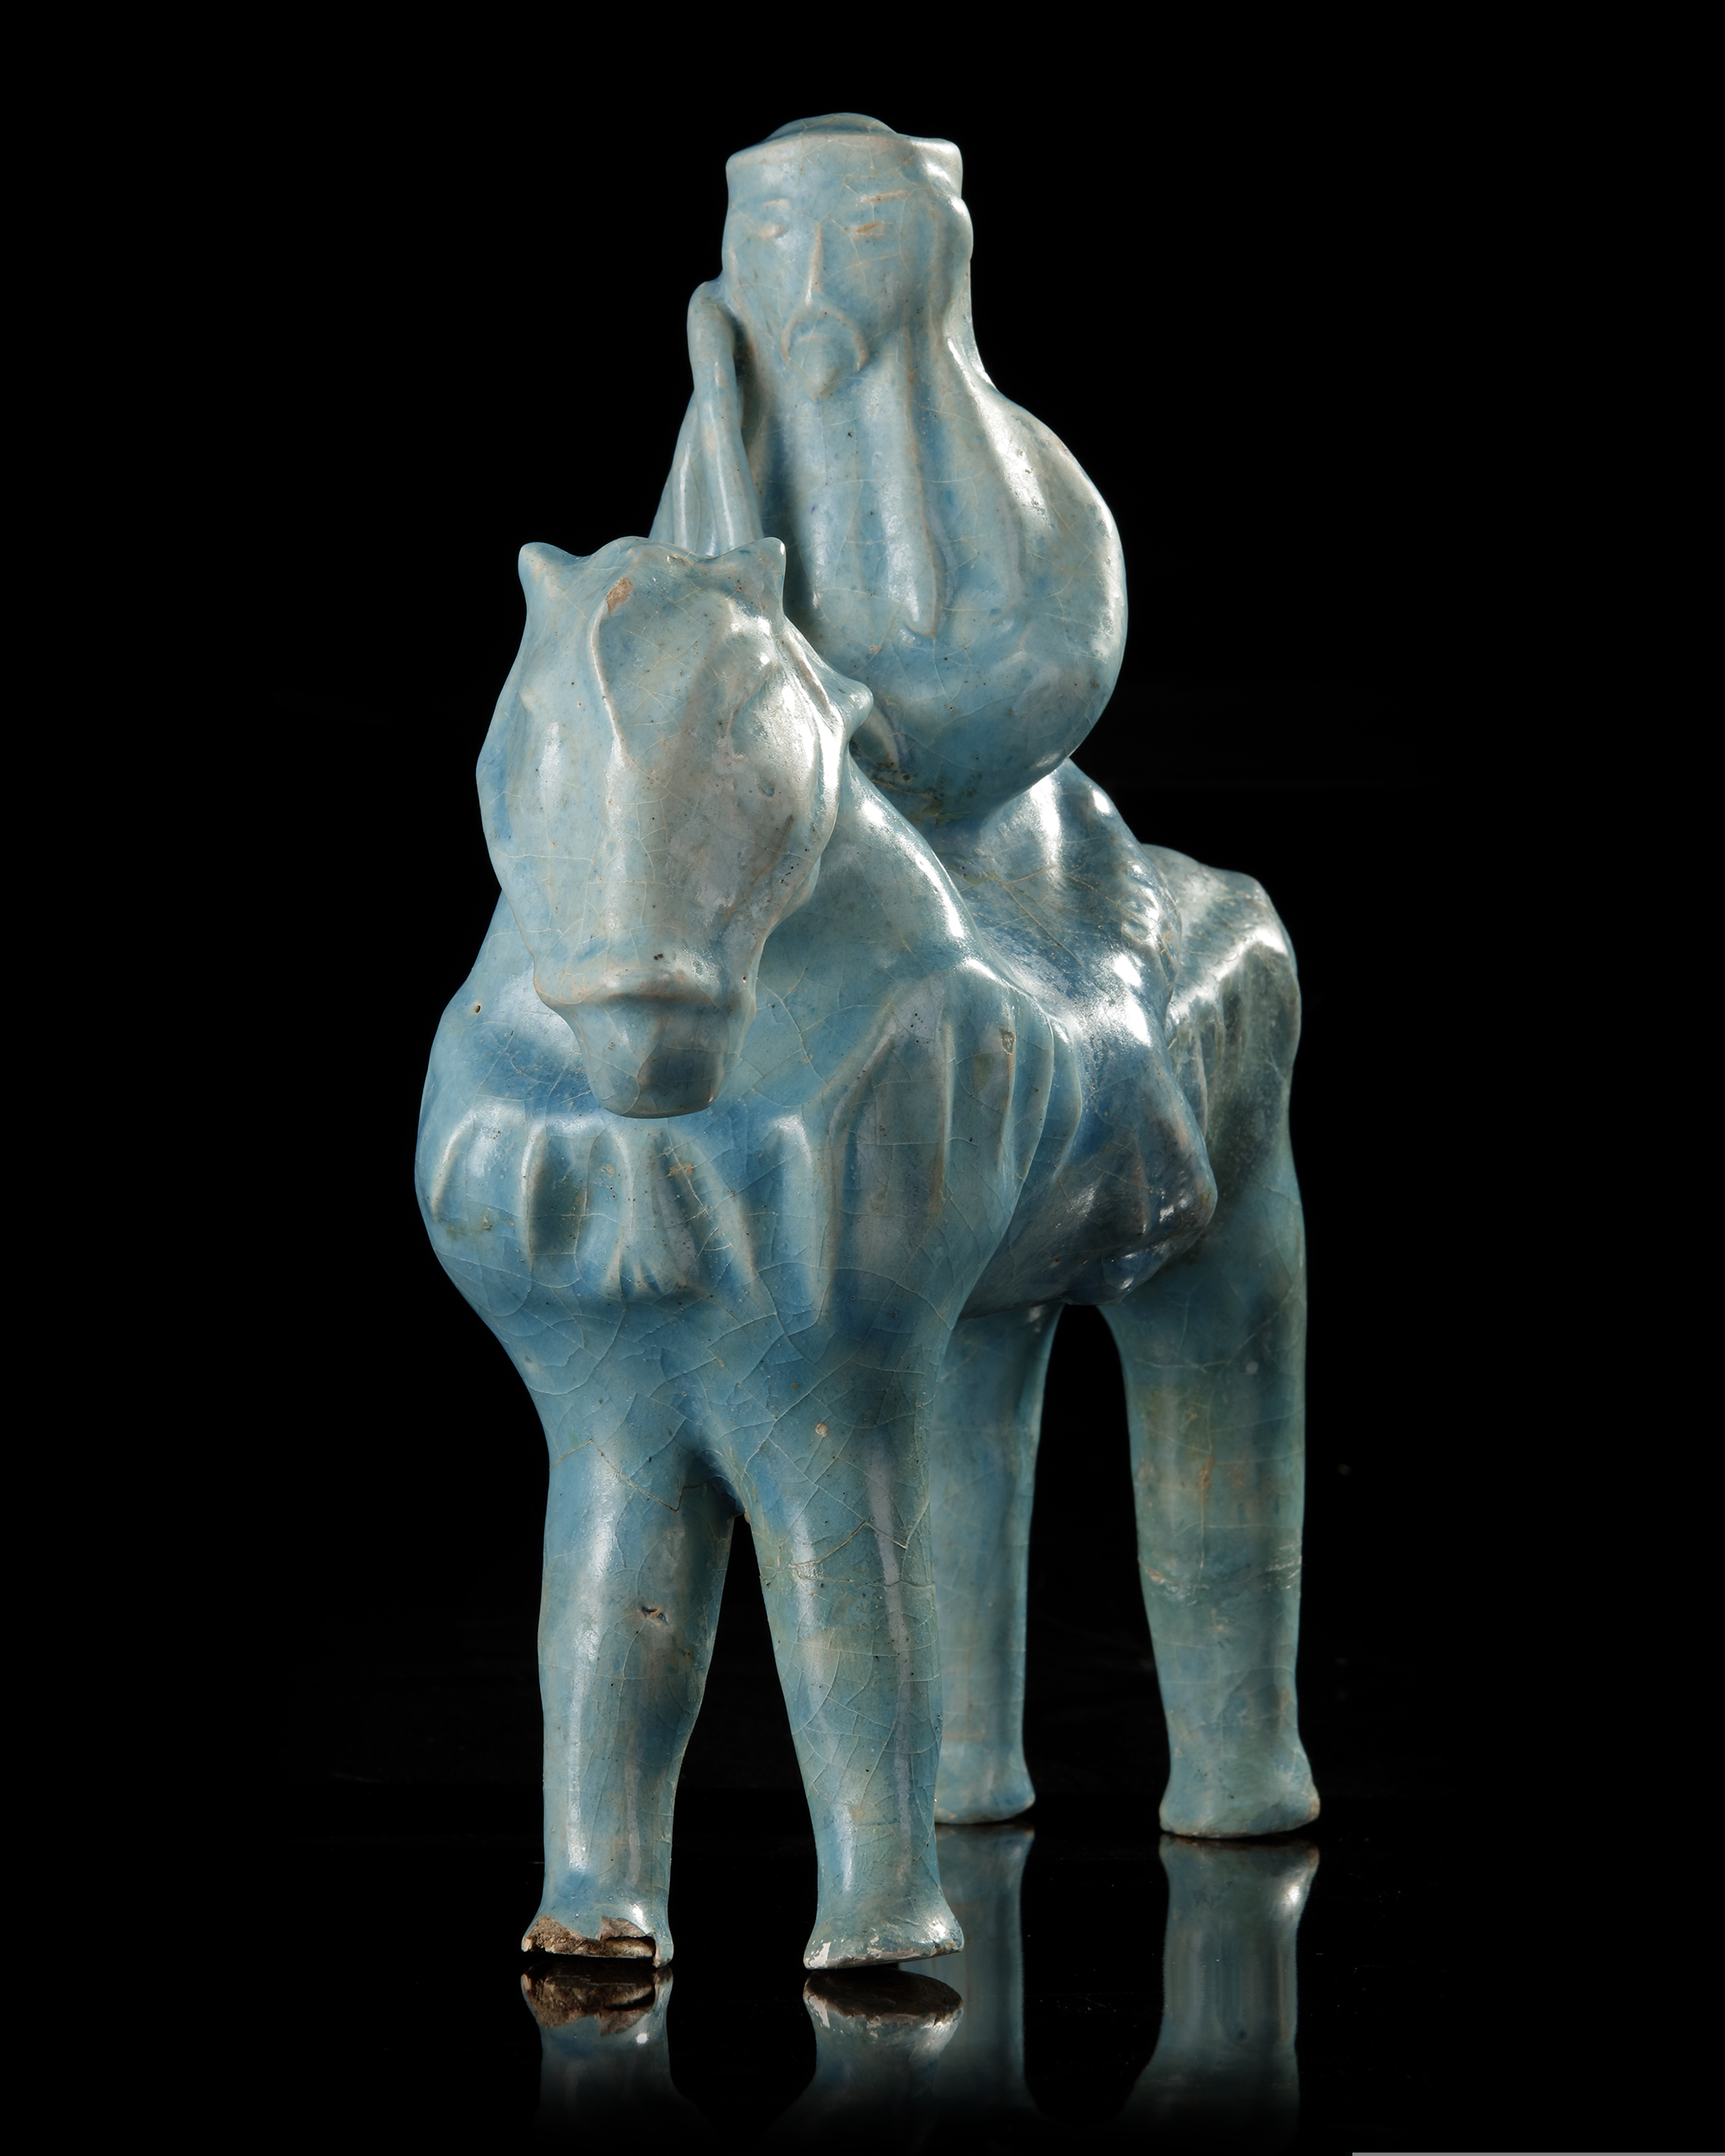 A RARE KASHAN TURQUOISE-GLAZED FIGURE OF A MONGOL, PERSIA, 13TH CENTURY - Image 2 of 7